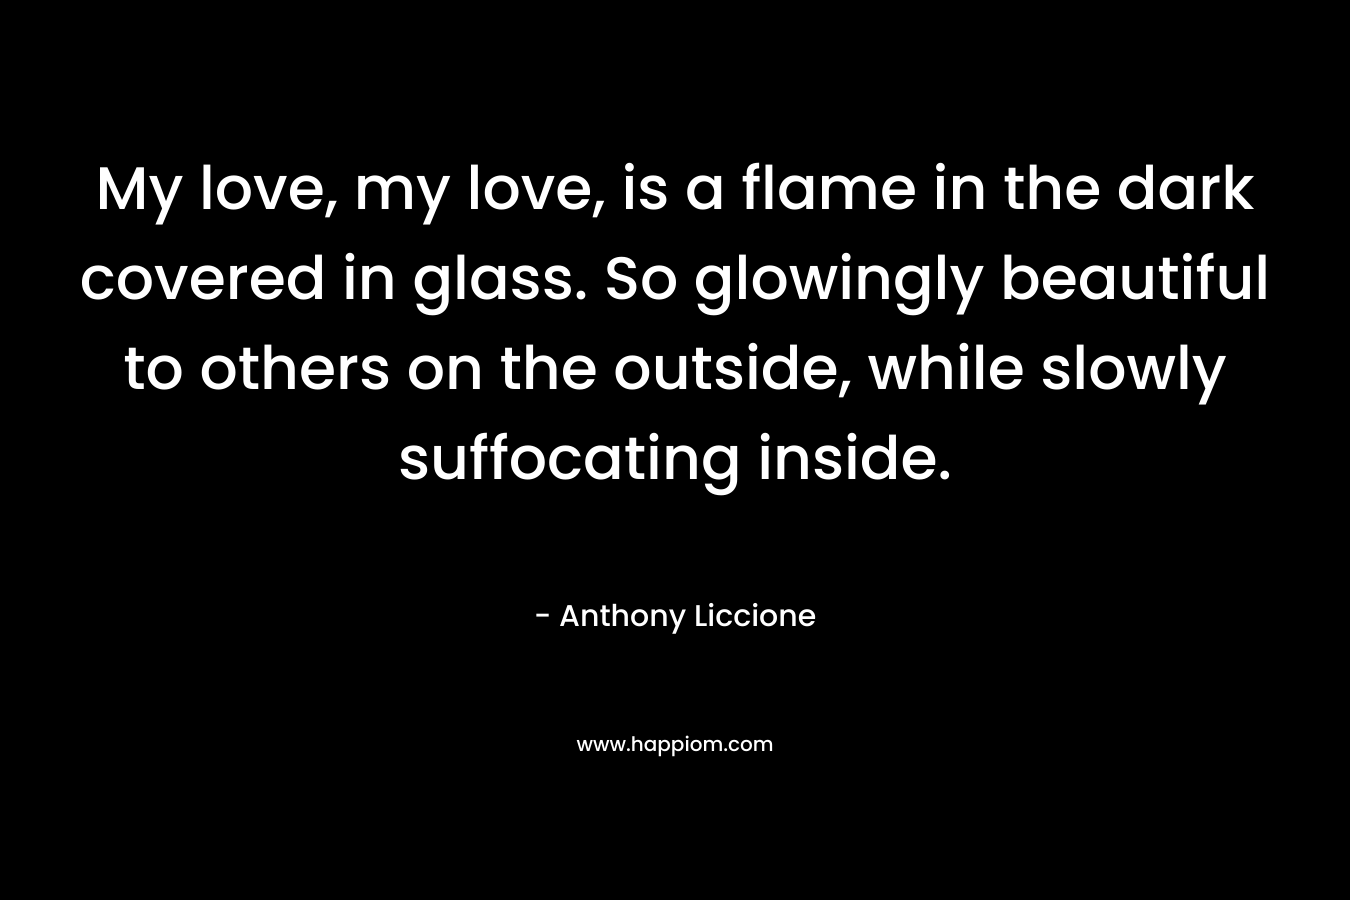 My love, my love, is a flame in the dark covered in glass. So glowingly beautiful to others on the outside, while slowly suffocating inside. – Anthony Liccione